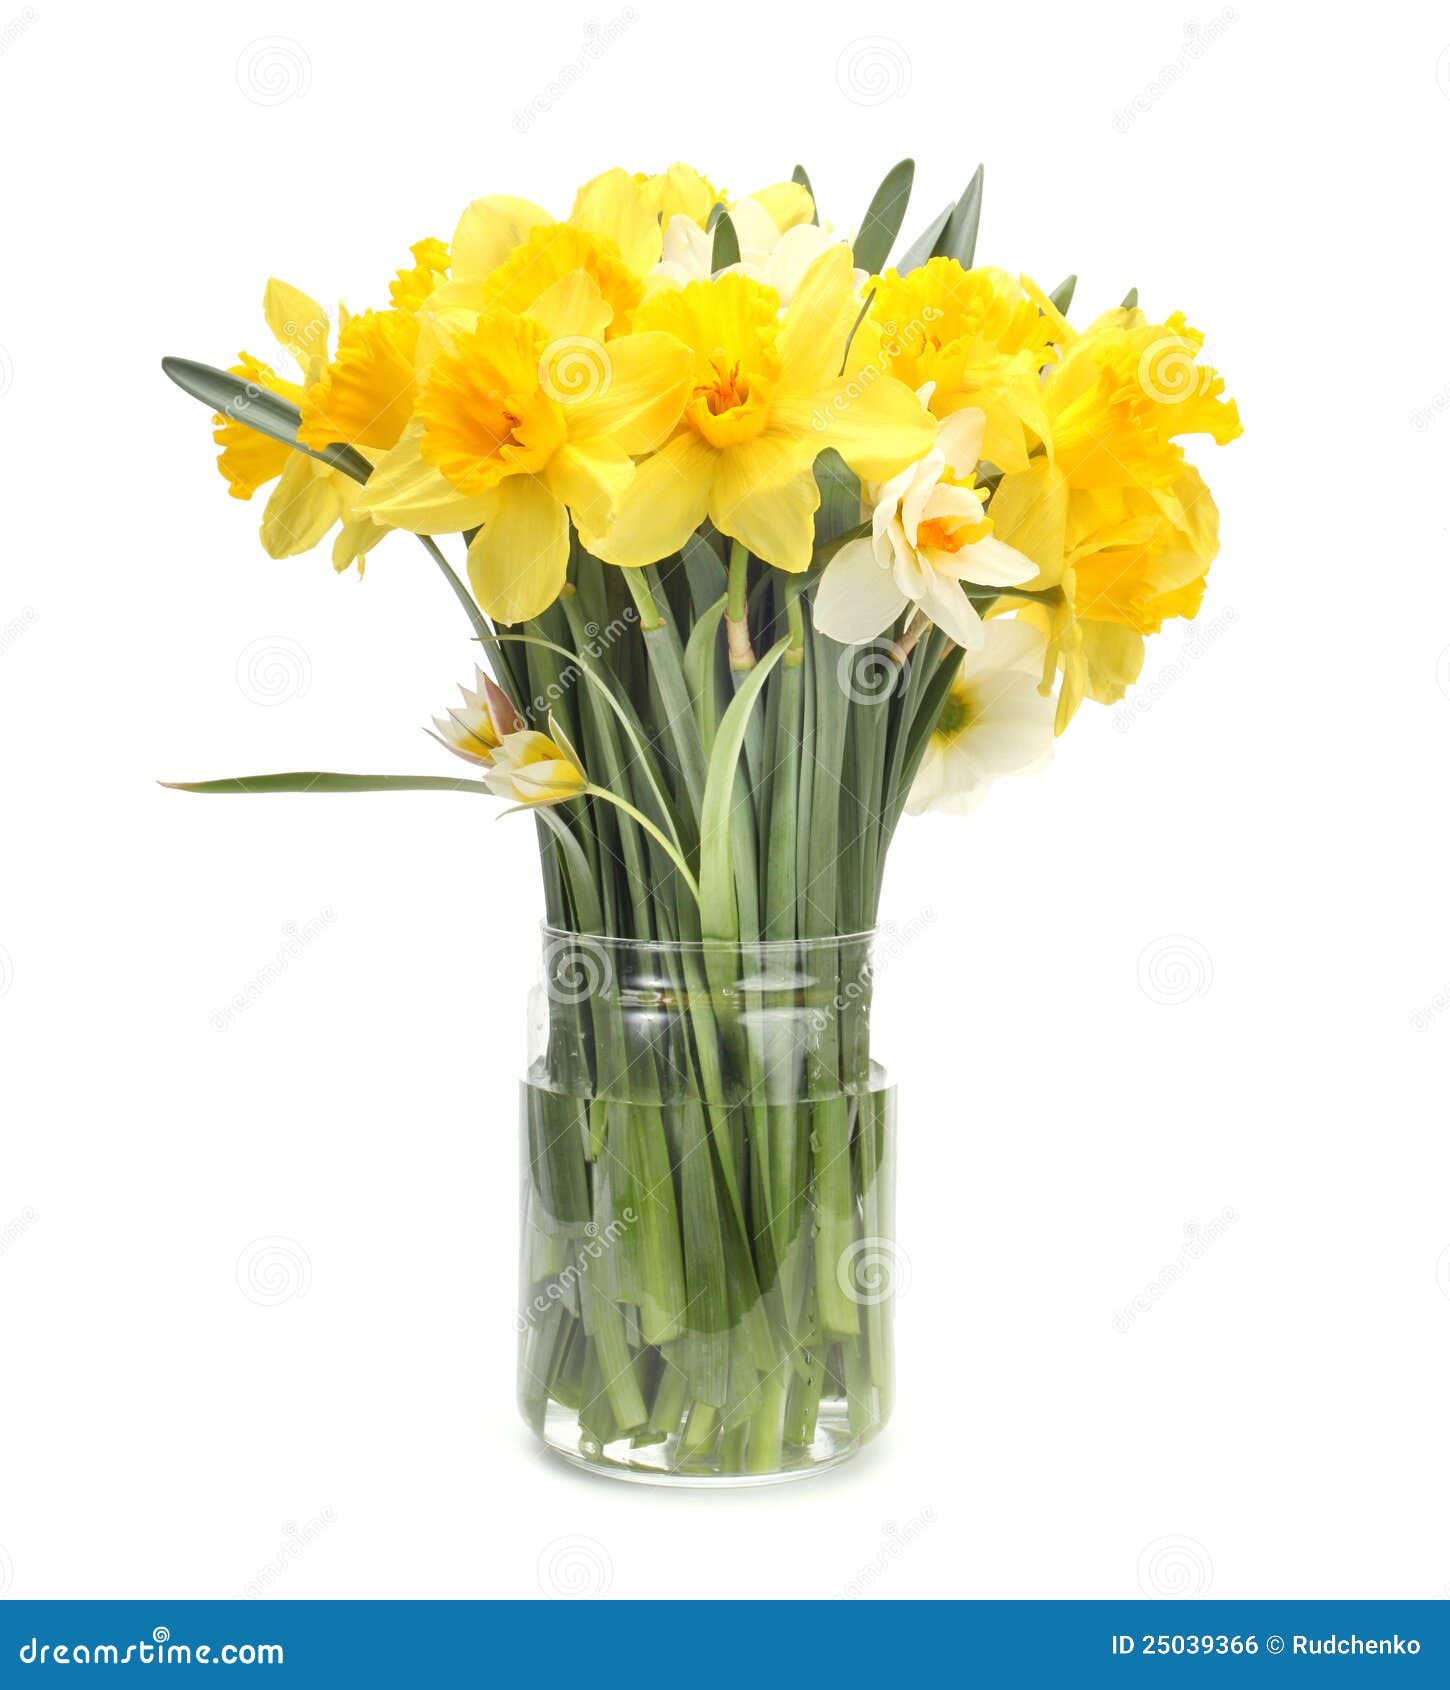 Narcissus Flower Bouquet Royalty Free Stock Image  Image: 25039366